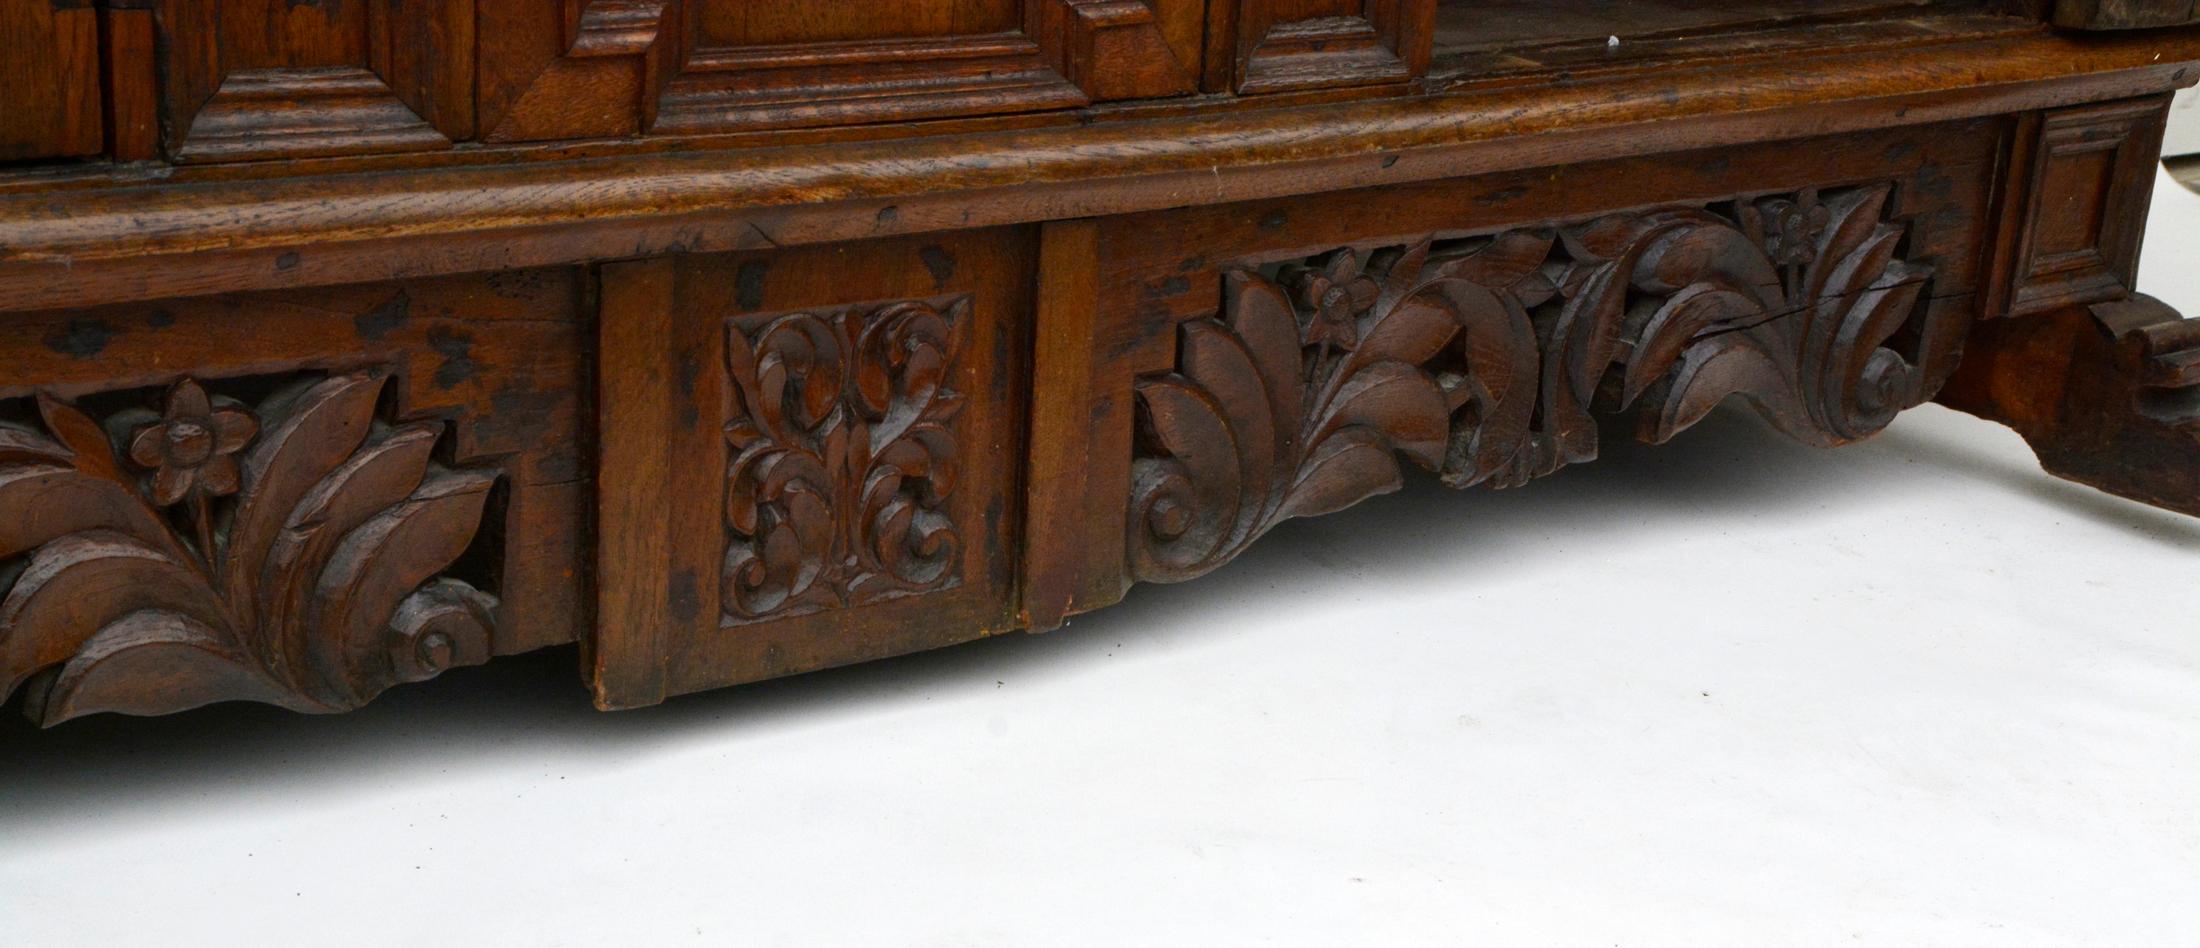 Baroque Sideboard, northern Germany, 1750s. Made of solid oak.

Cut out and protruding skid feet. Very richly floral carved apron, partly openwork. The three-door corpus is divided by four ribbons with geometric caskets. Two full-height doors with